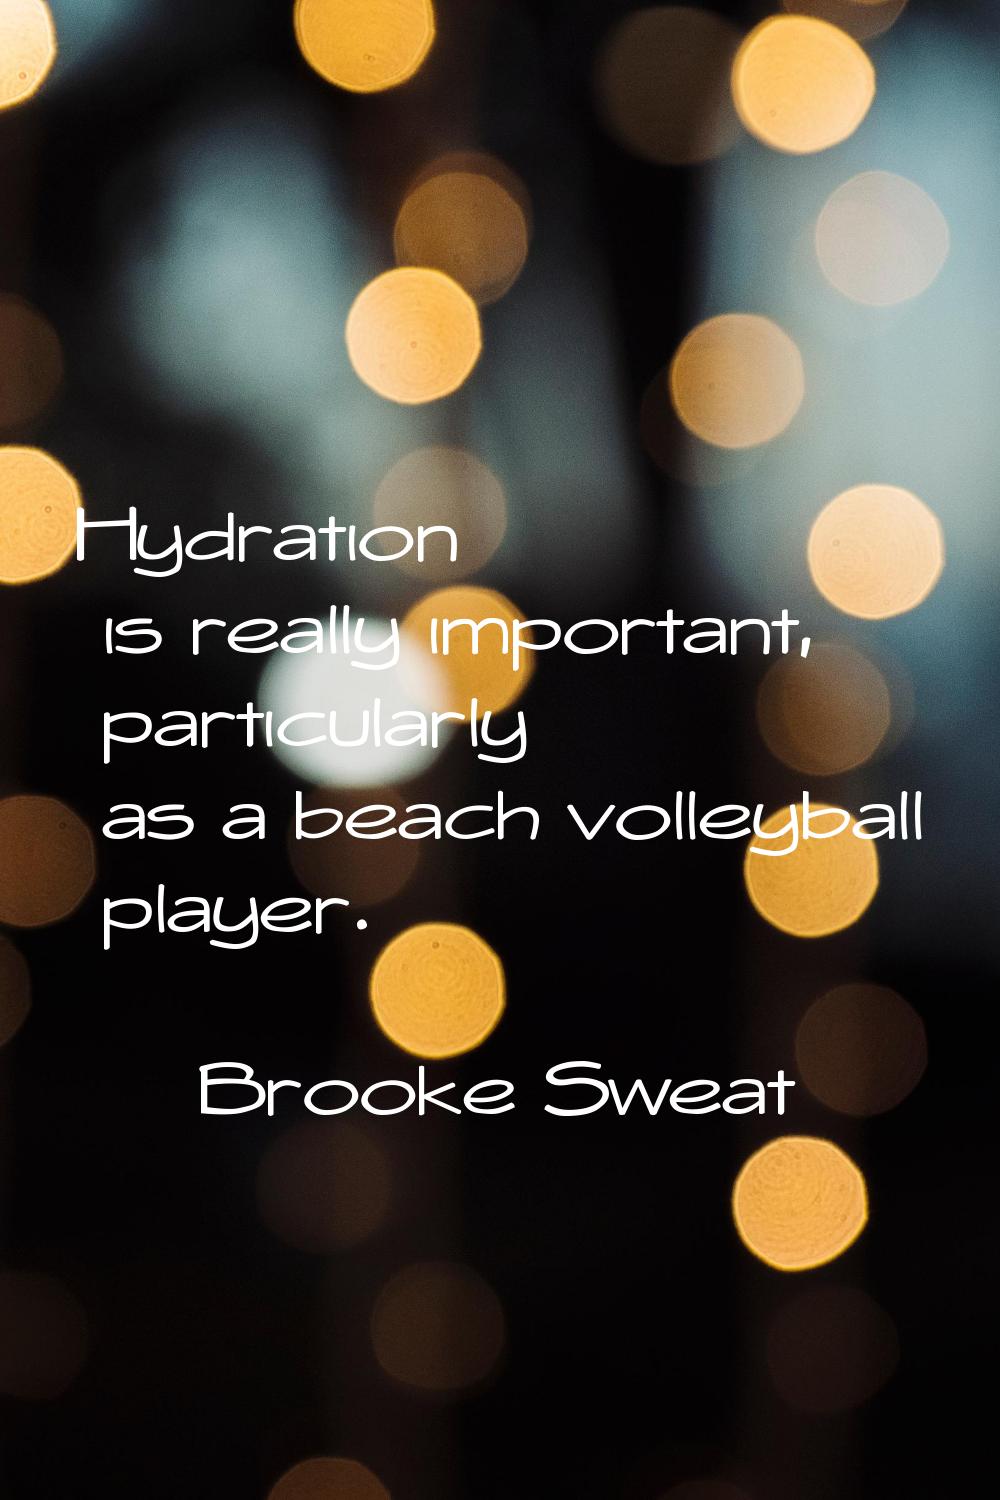 Hydration is really important, particularly as a beach volleyball player.